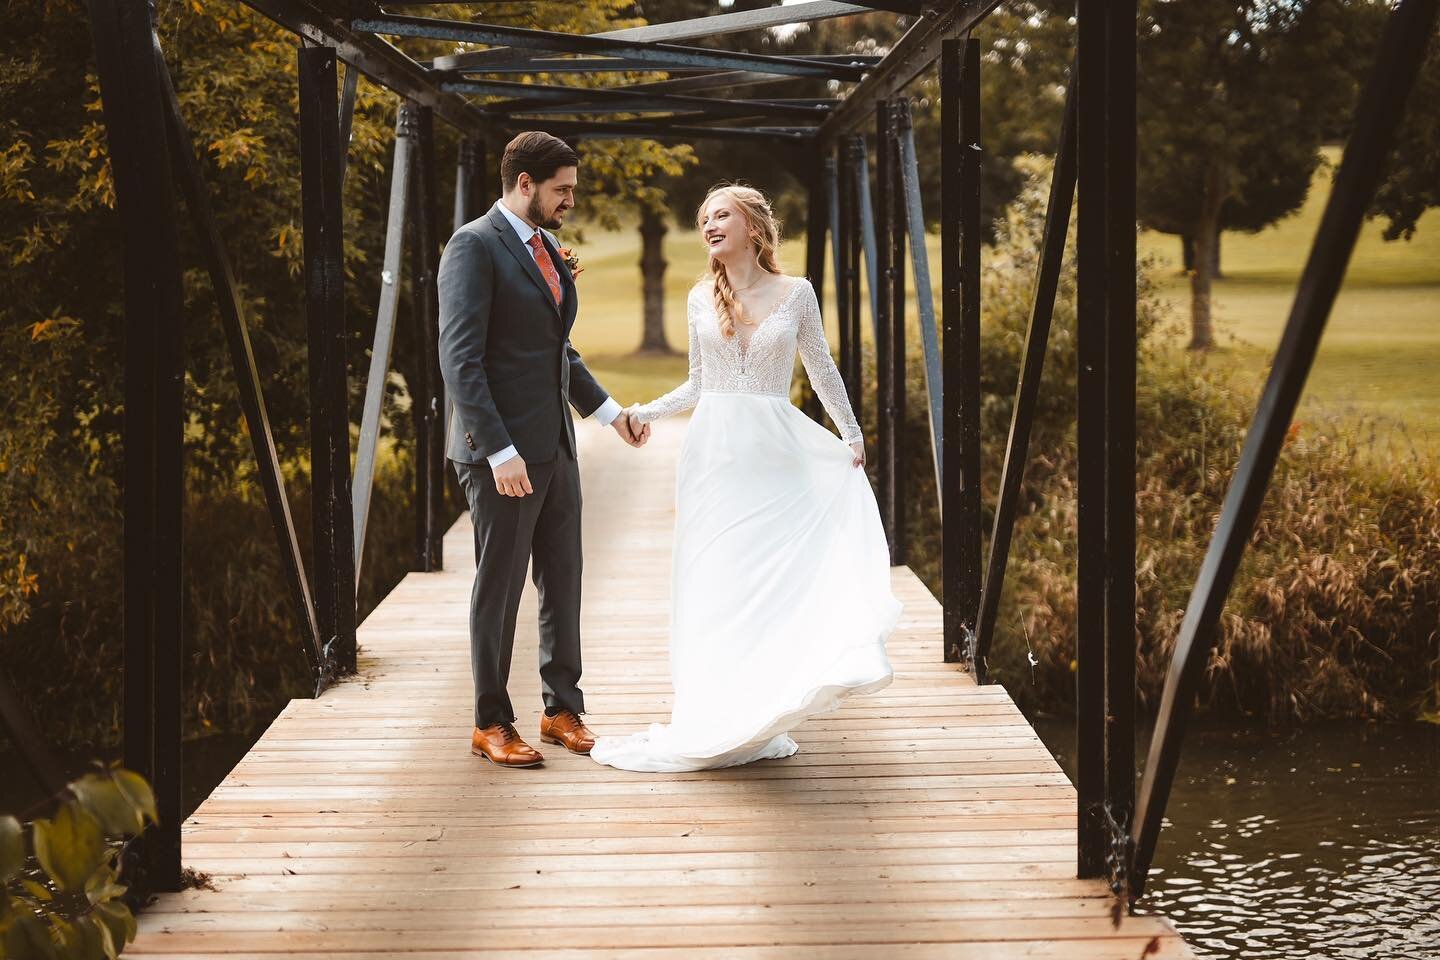 The happy couple! Congratulations Georgia and Blake! 🥂 Here&rsquo;s to a wonderful marriage! 🥂Thank you Georgia for choosing your dress at our boutique. You were a joy to work with. 
.
@bylillianwest style 66135
.
#lidiasrealbride #lillianwest #lil